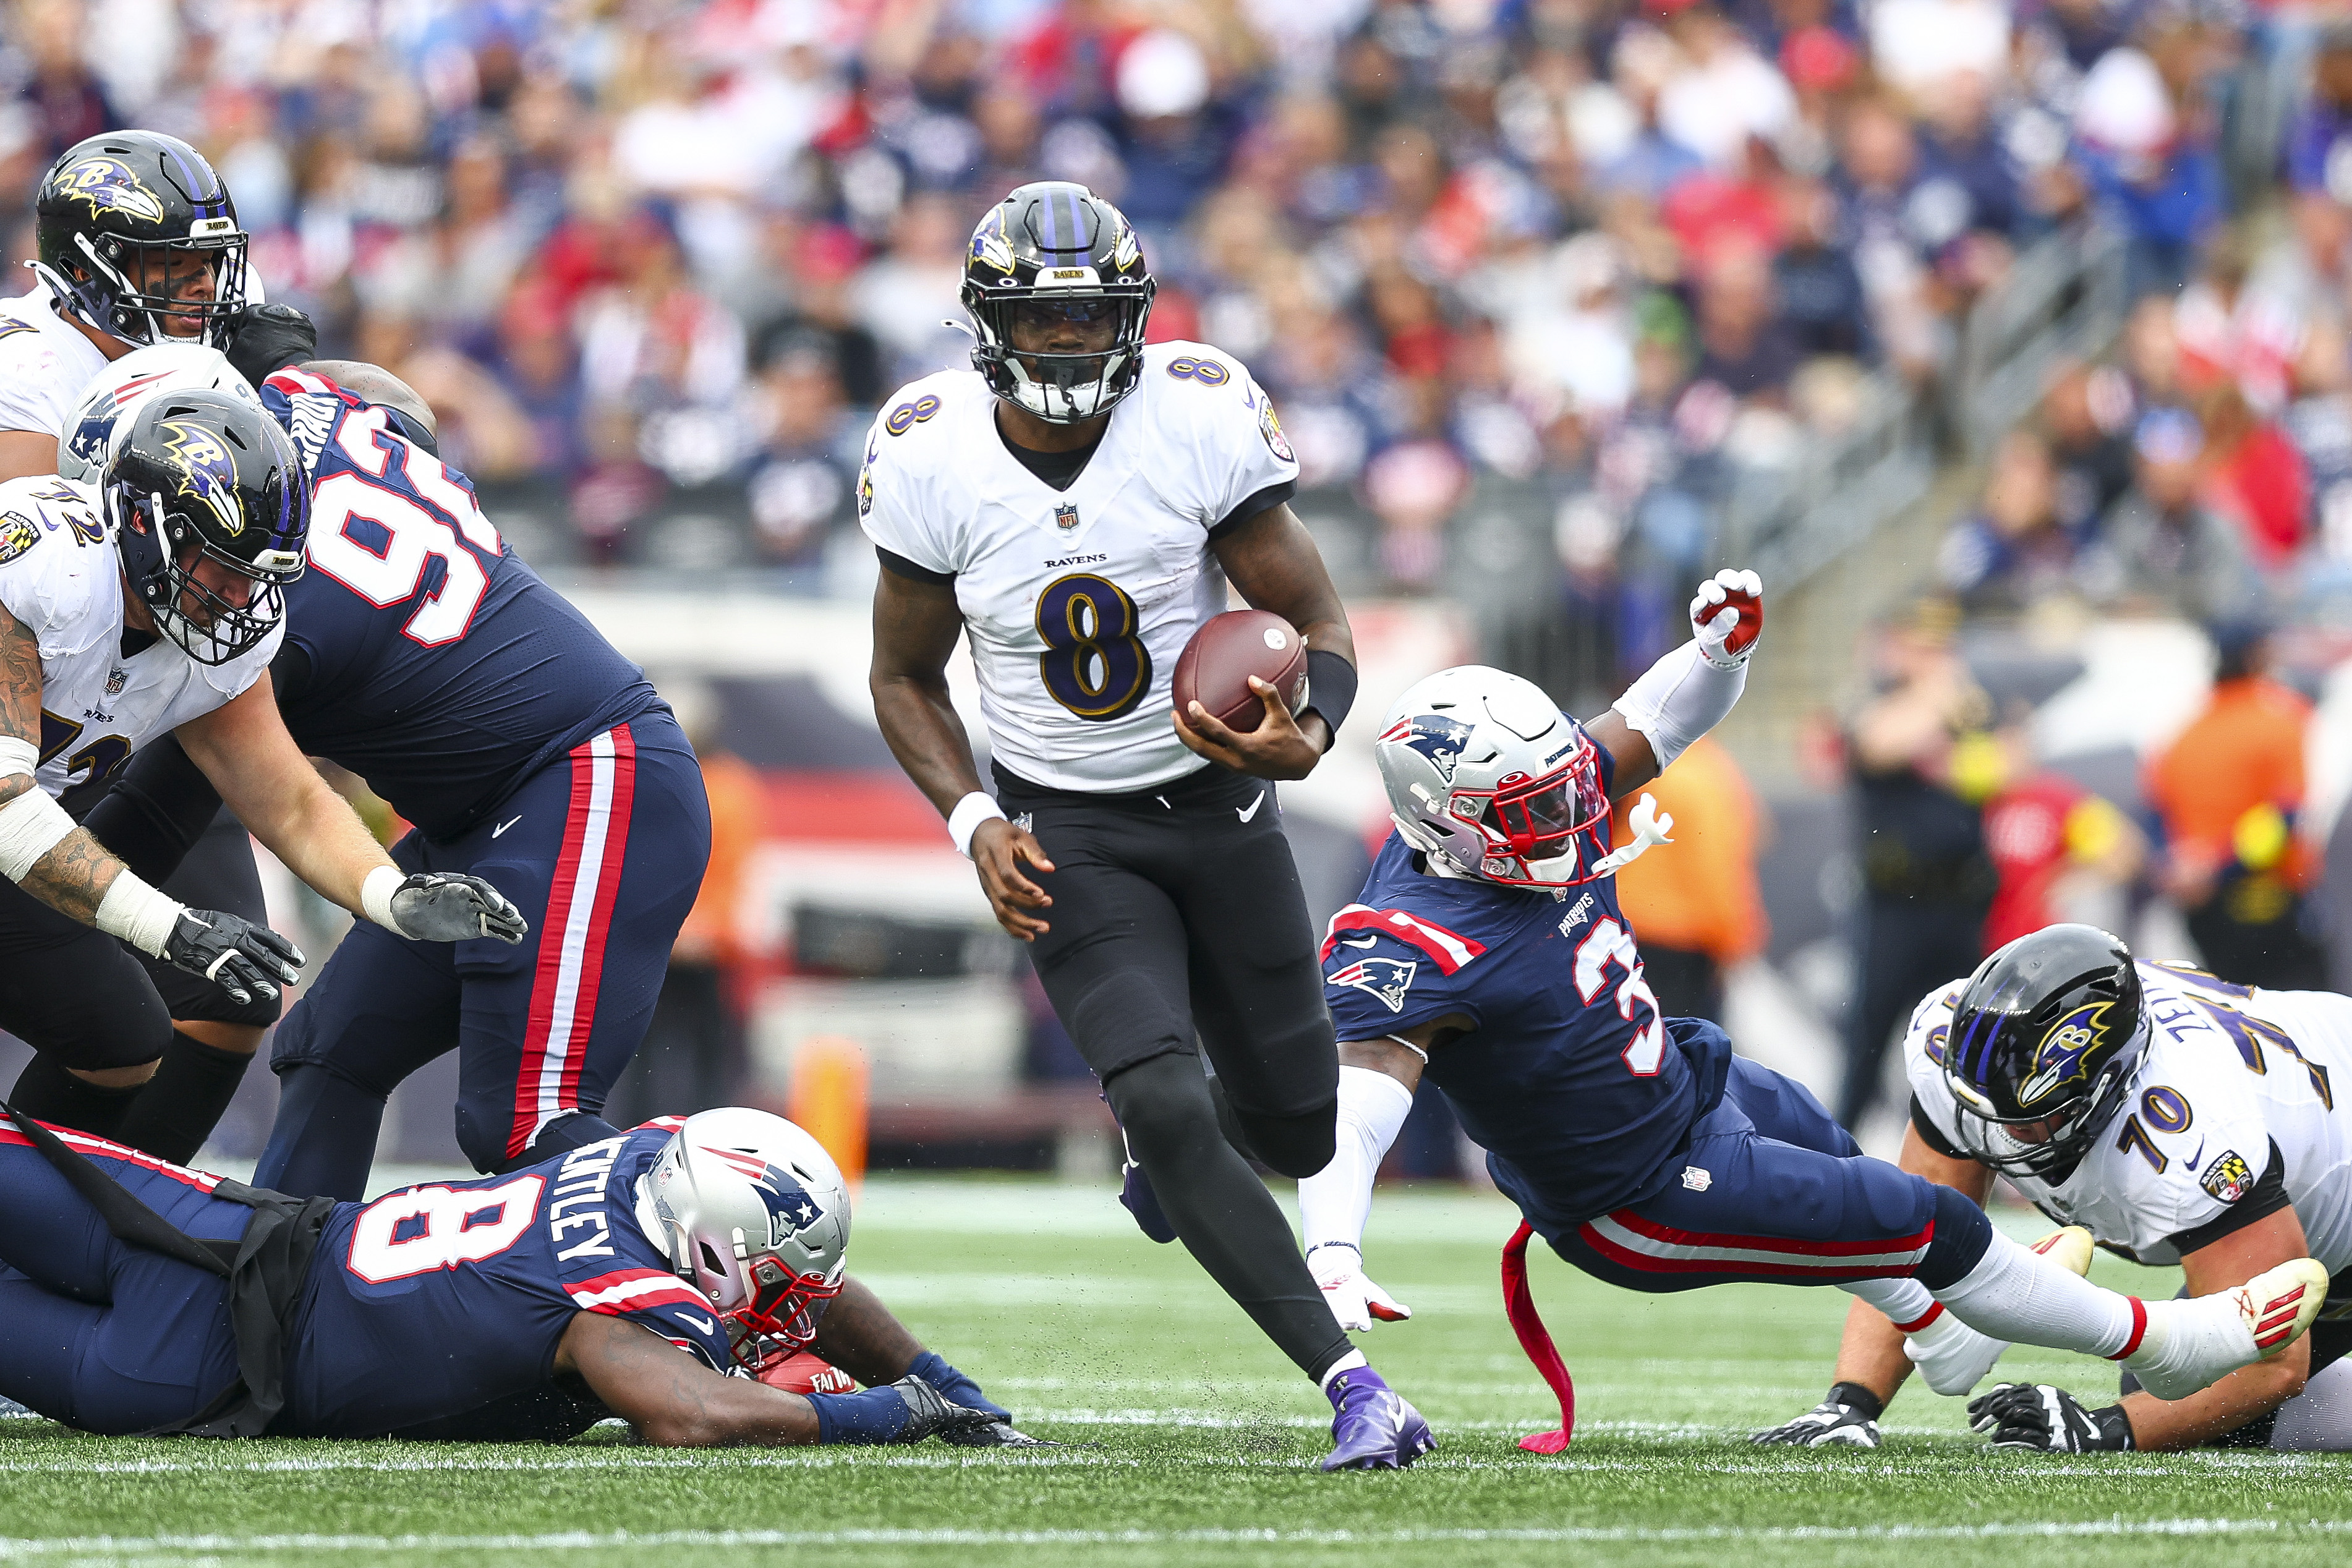 Quarterback Lamar Jackson of the Baltimore Ravens runs the ball during the second half against the New England Patriots at Gillette Stadium on September 25, 2022 in Foxborough, Massachusetts.